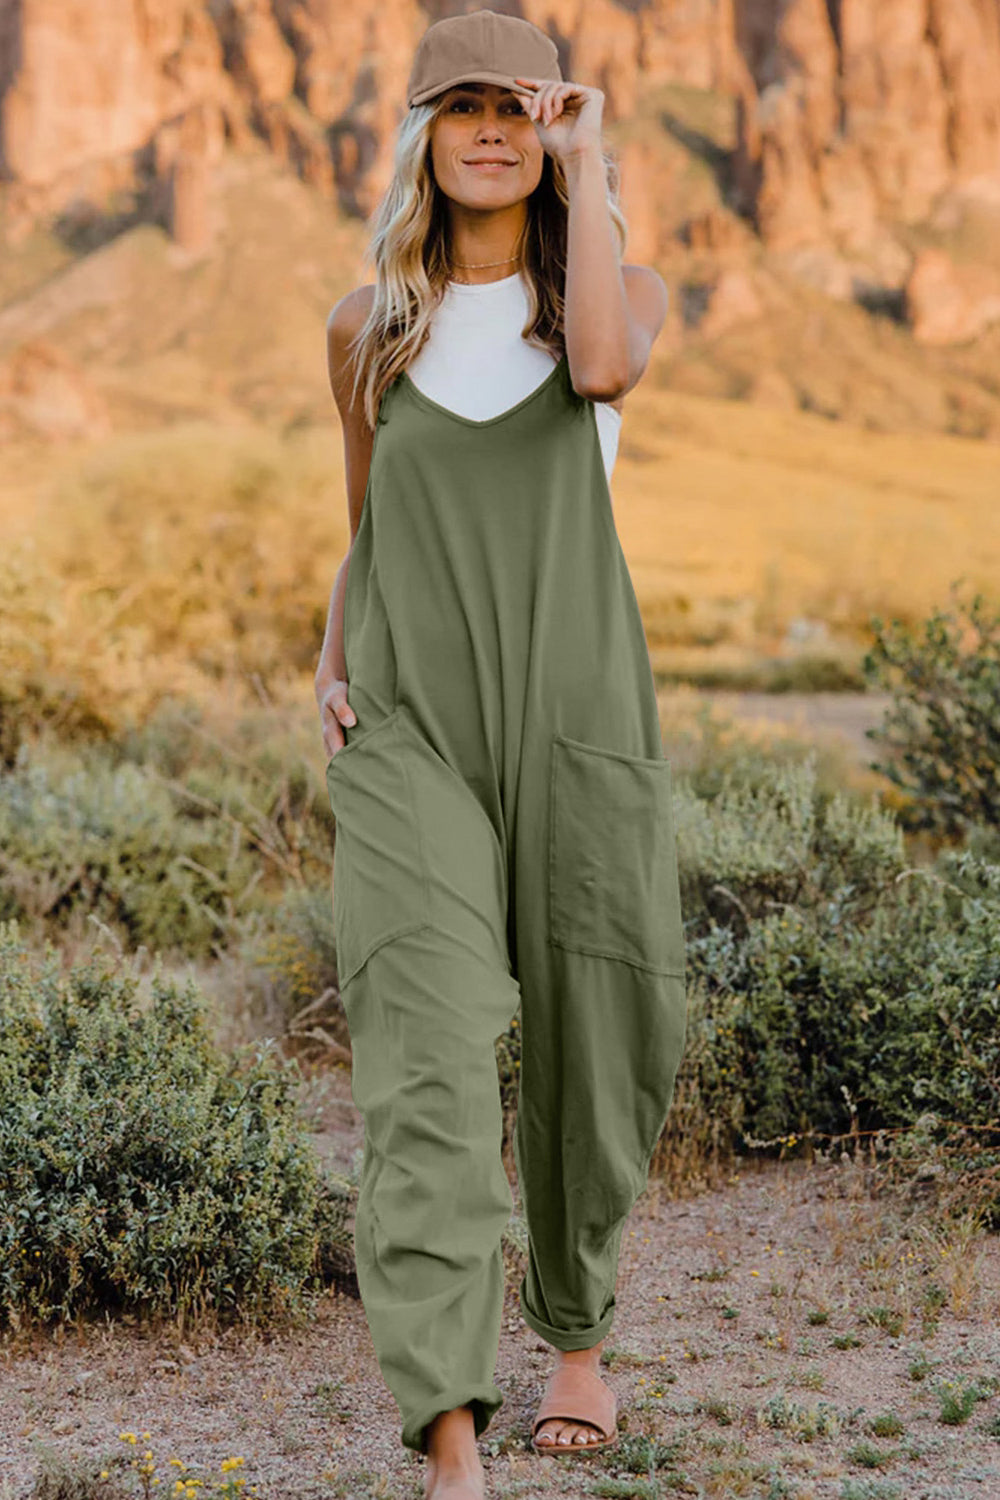 Double Take V-Neck Sleeveless Jumpsuit with Pockets